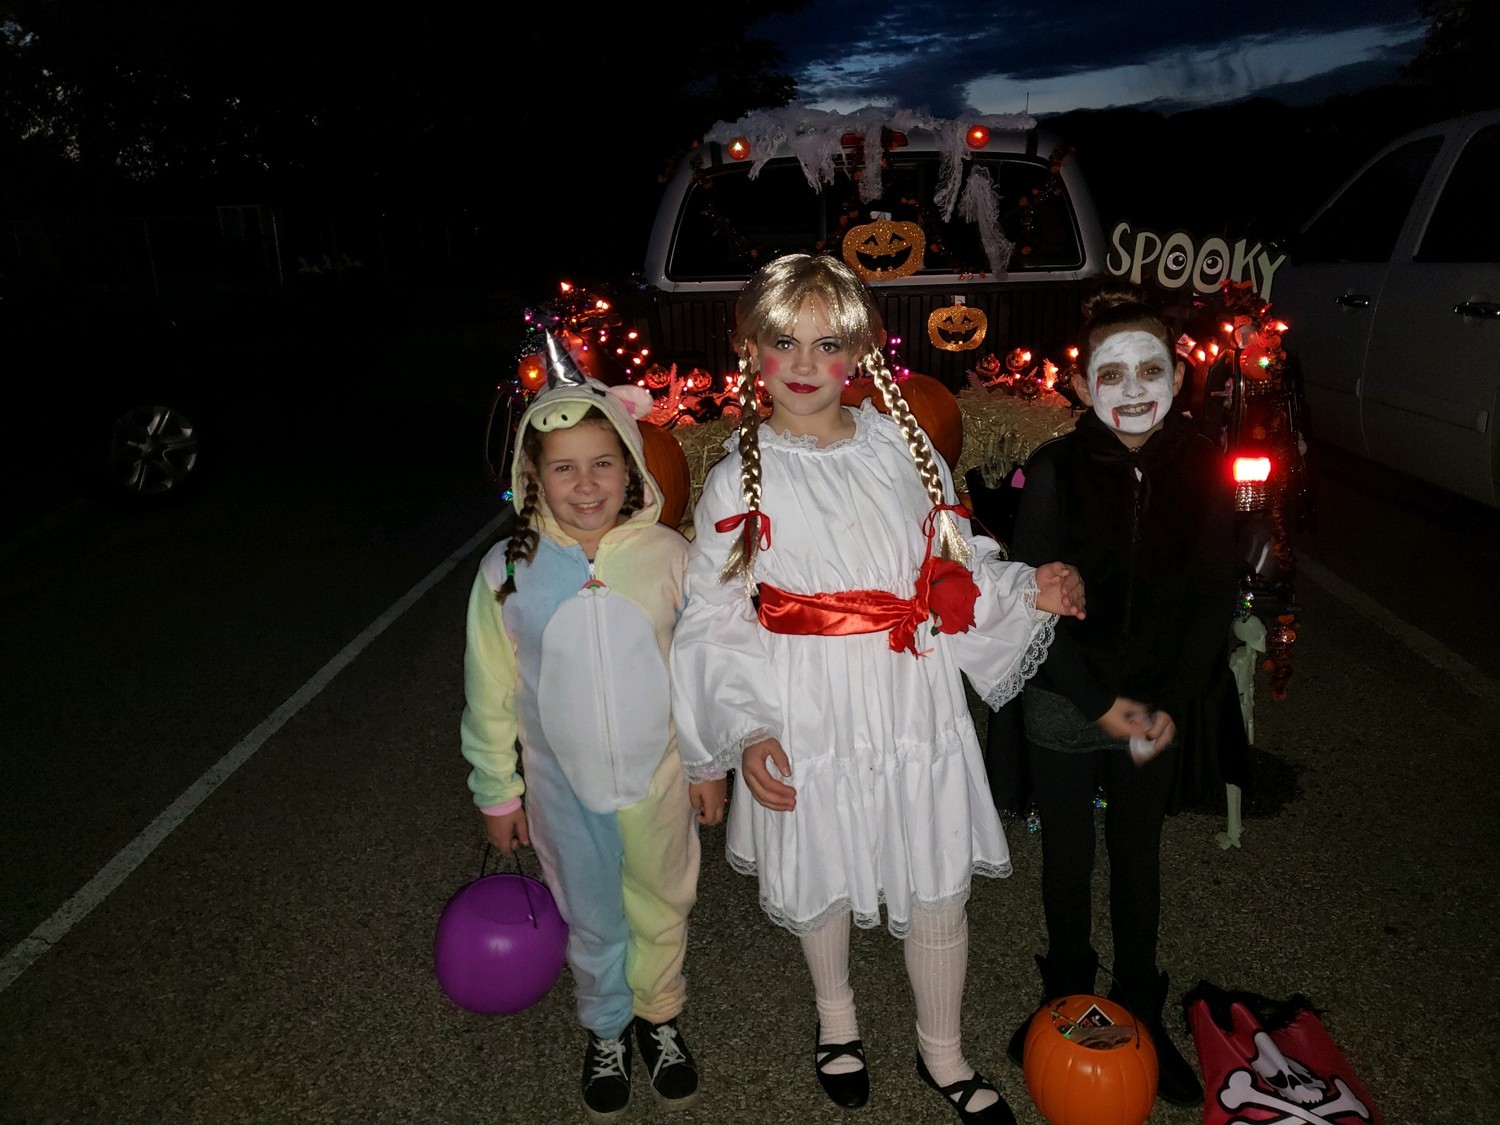 Students from St. Mary School in Cranston take part in the school’s Trunk or Treat tradition on October 26. Pictured from left to right are third graders Belle Bradley, Rachele Natalia Beeley and Lily Sherman.